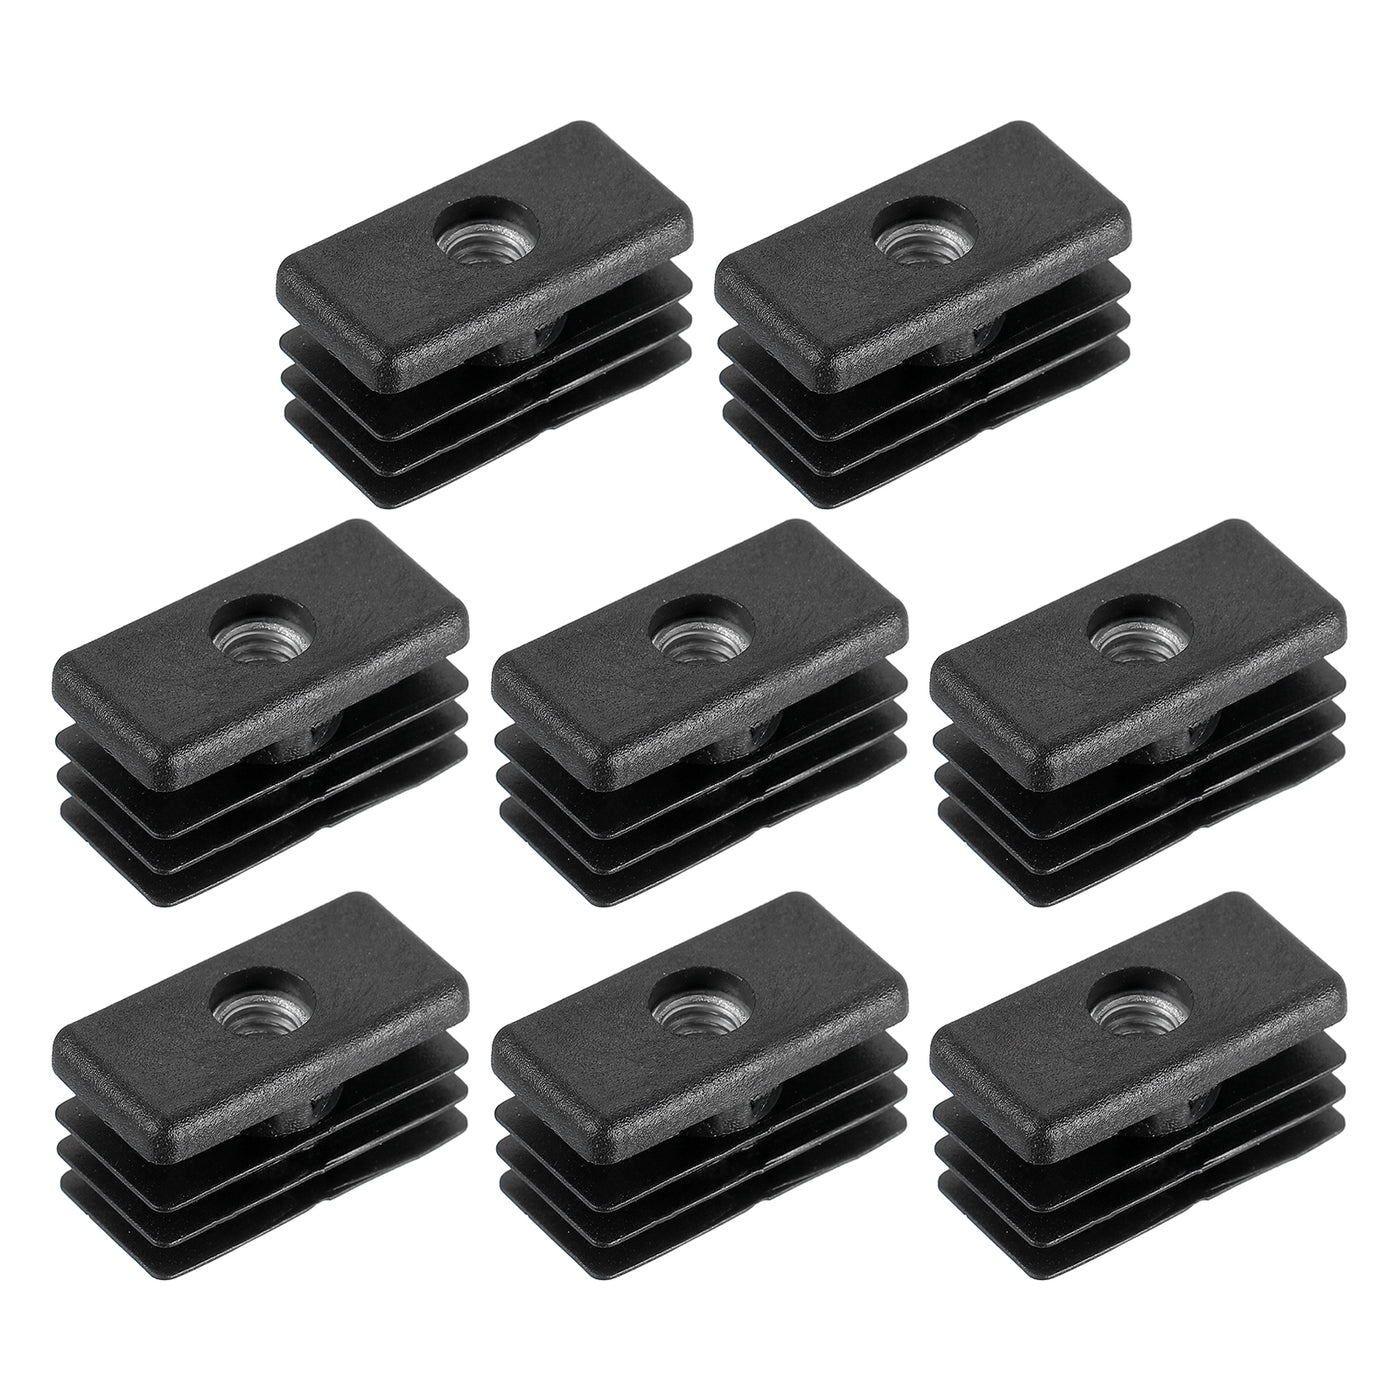 uxcell Uxcell 8Pcs 1.18"x0.59" Caster Insert with Thread, Rectangle M6 Thread for Furniture